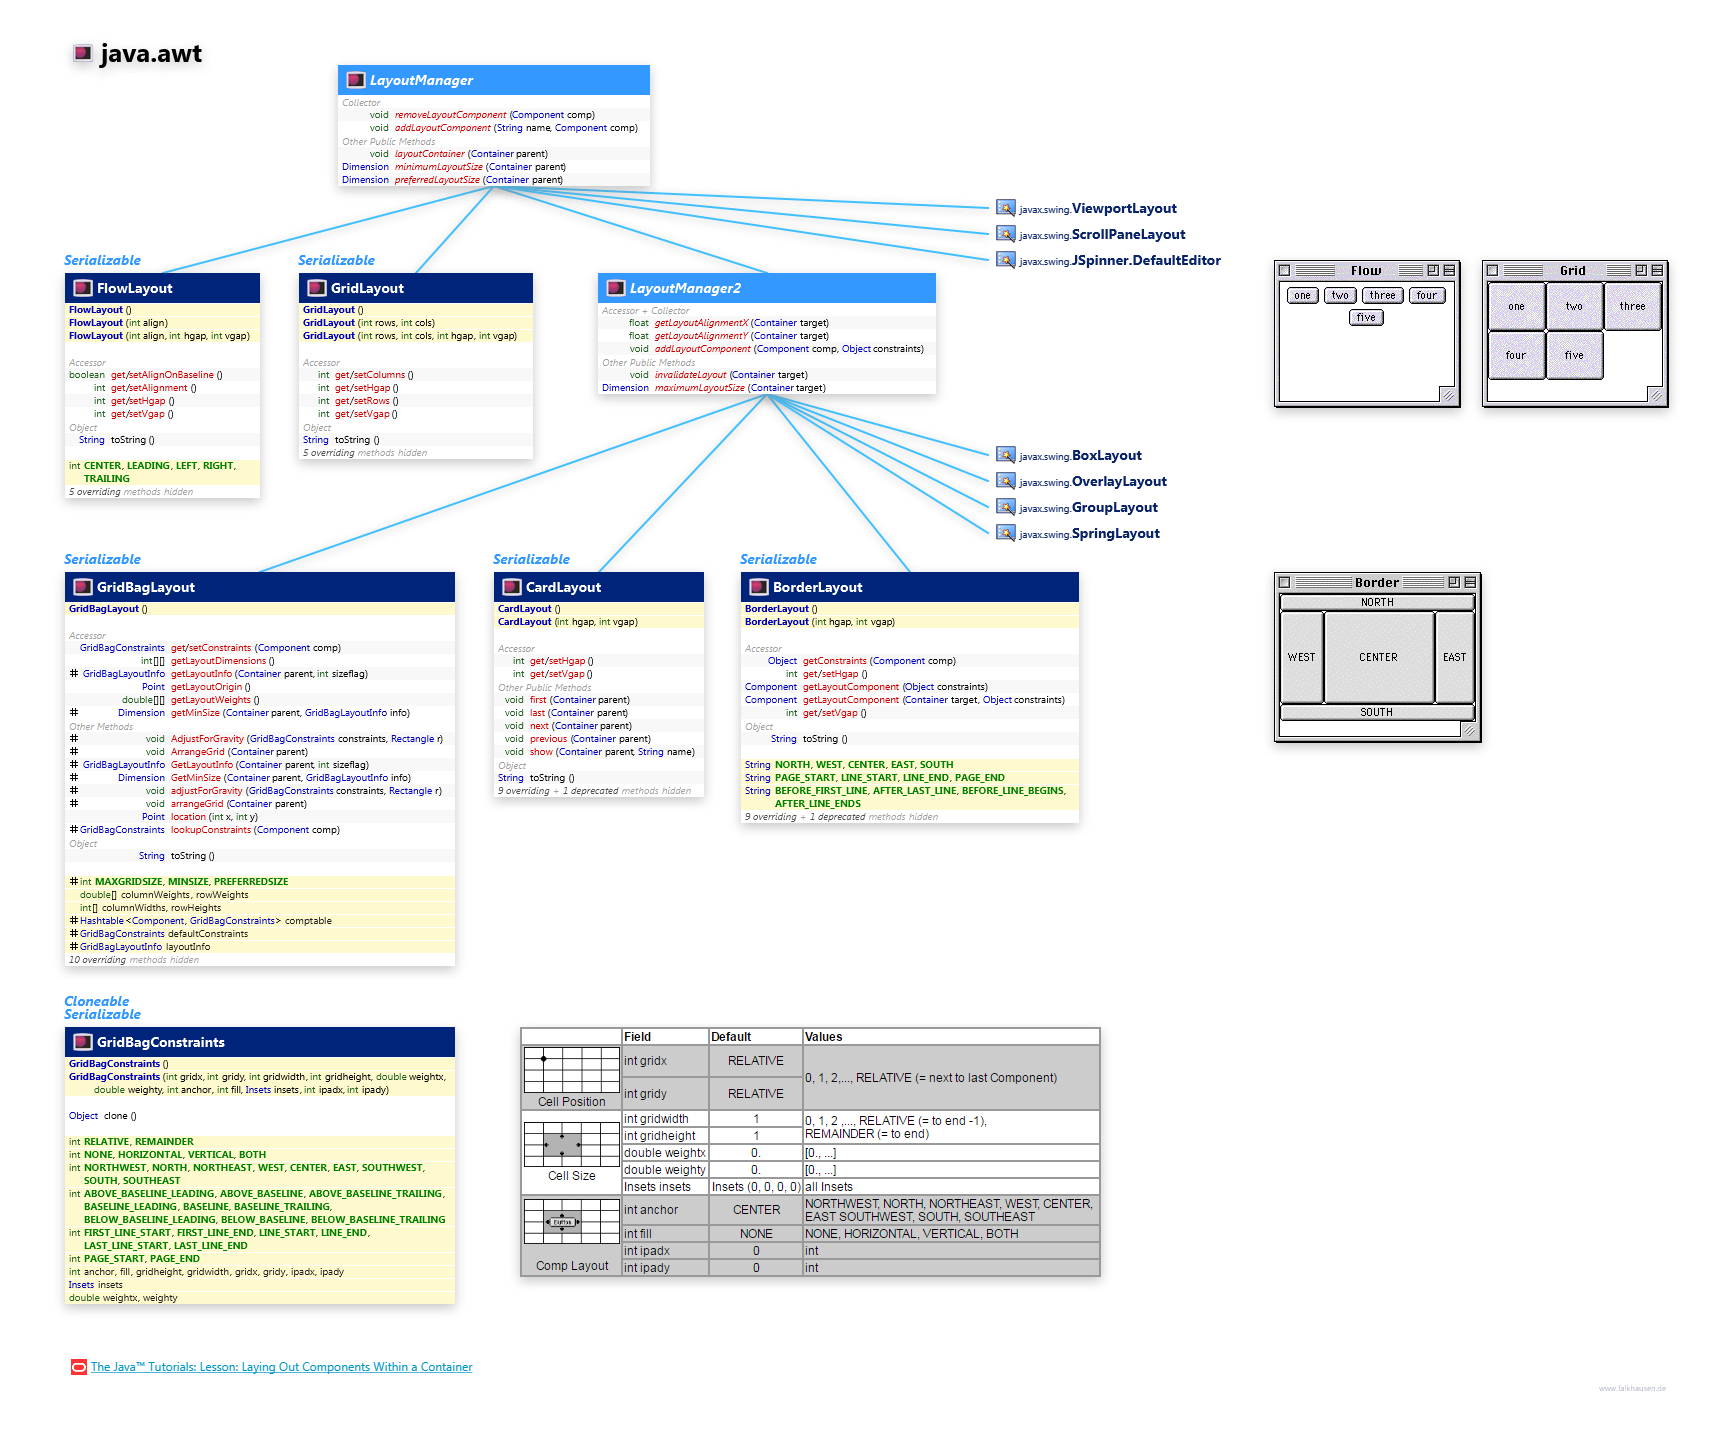 java.awt LayoutManager class diagram and api documentation for Java 7